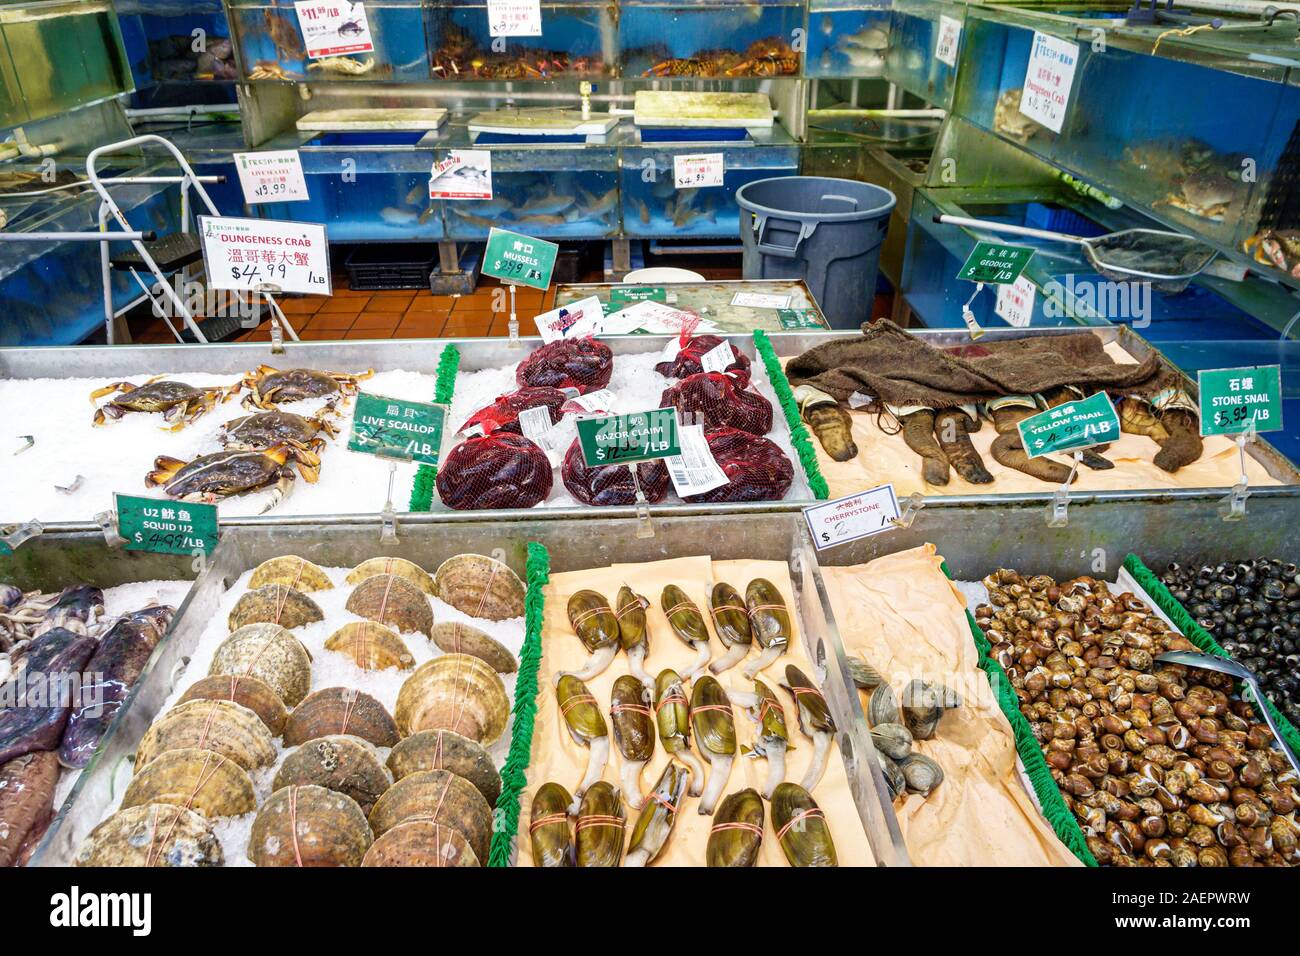 Orlando Florida,East Colonial Drive,Little Vietnam,Asian,iFresh Market,inside,fresh fish seafood,clams,crabs,squid,display sale,FL190920142 Stock Photo